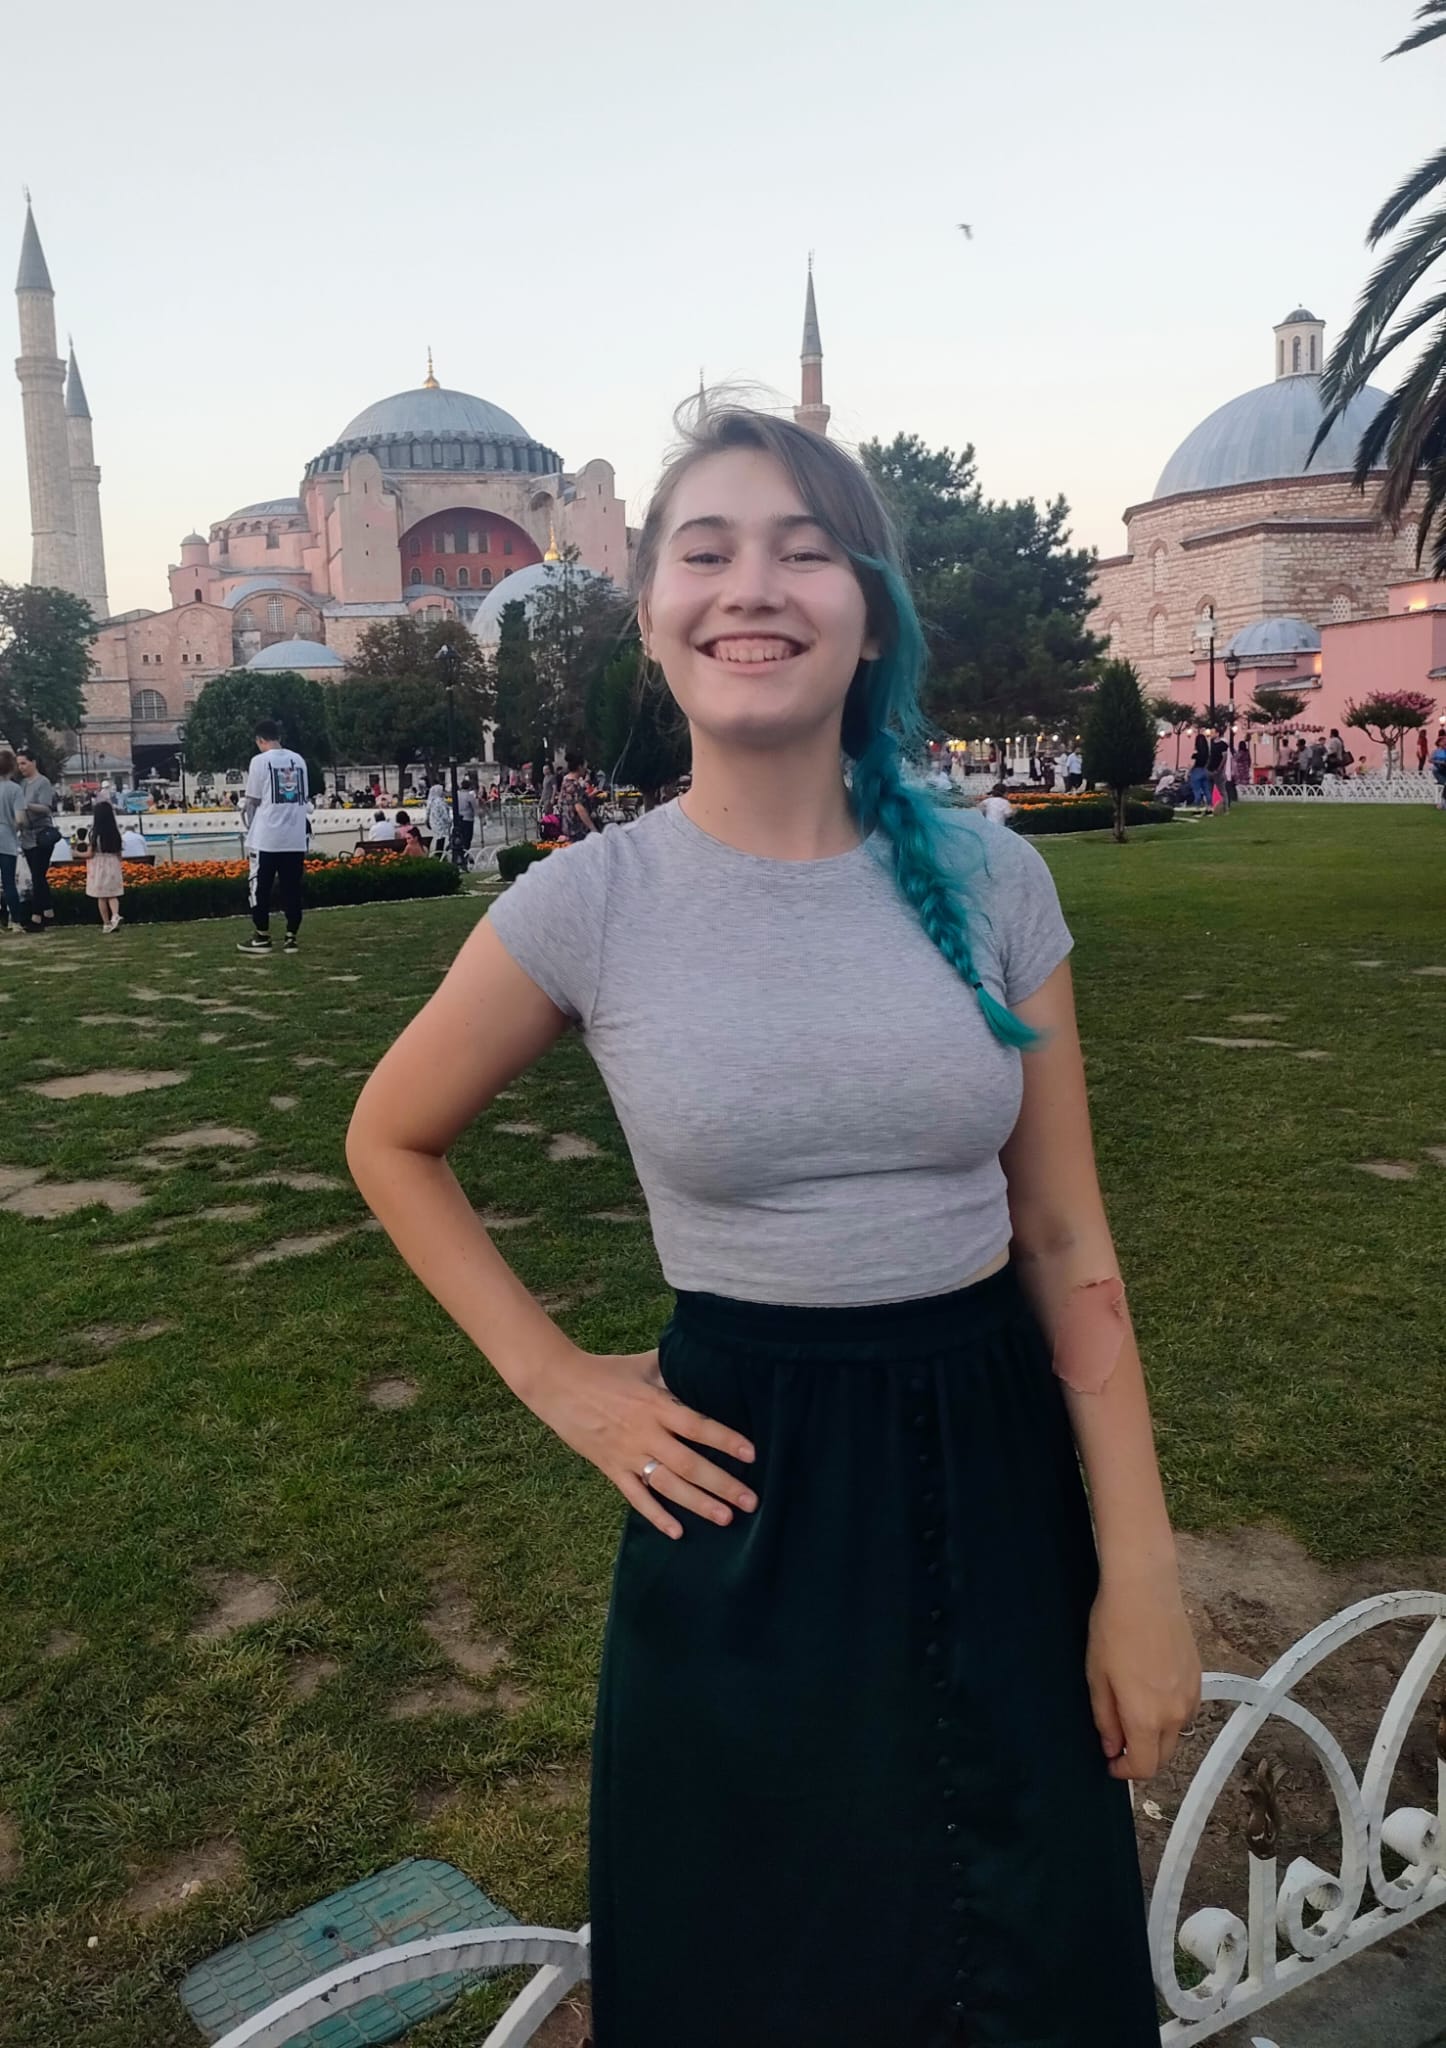 An image of a young woman standing in front of a mosque in Turkey.